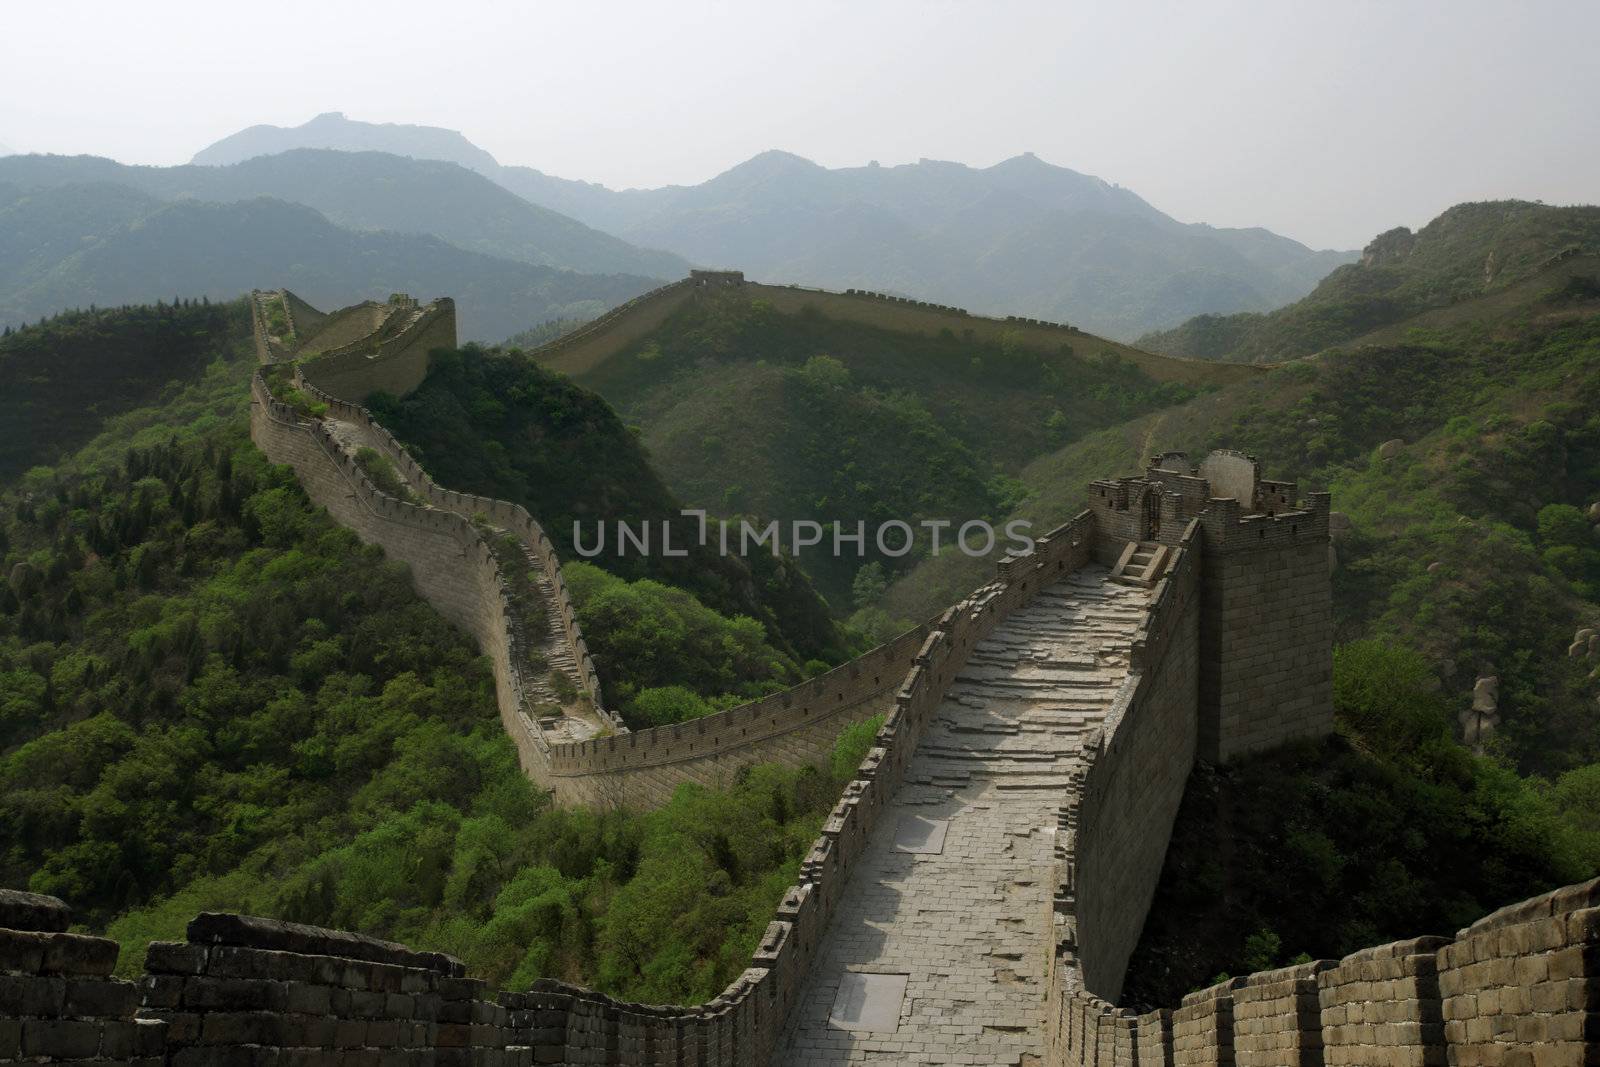 A section of The Great Wall of China, in Badaling.
